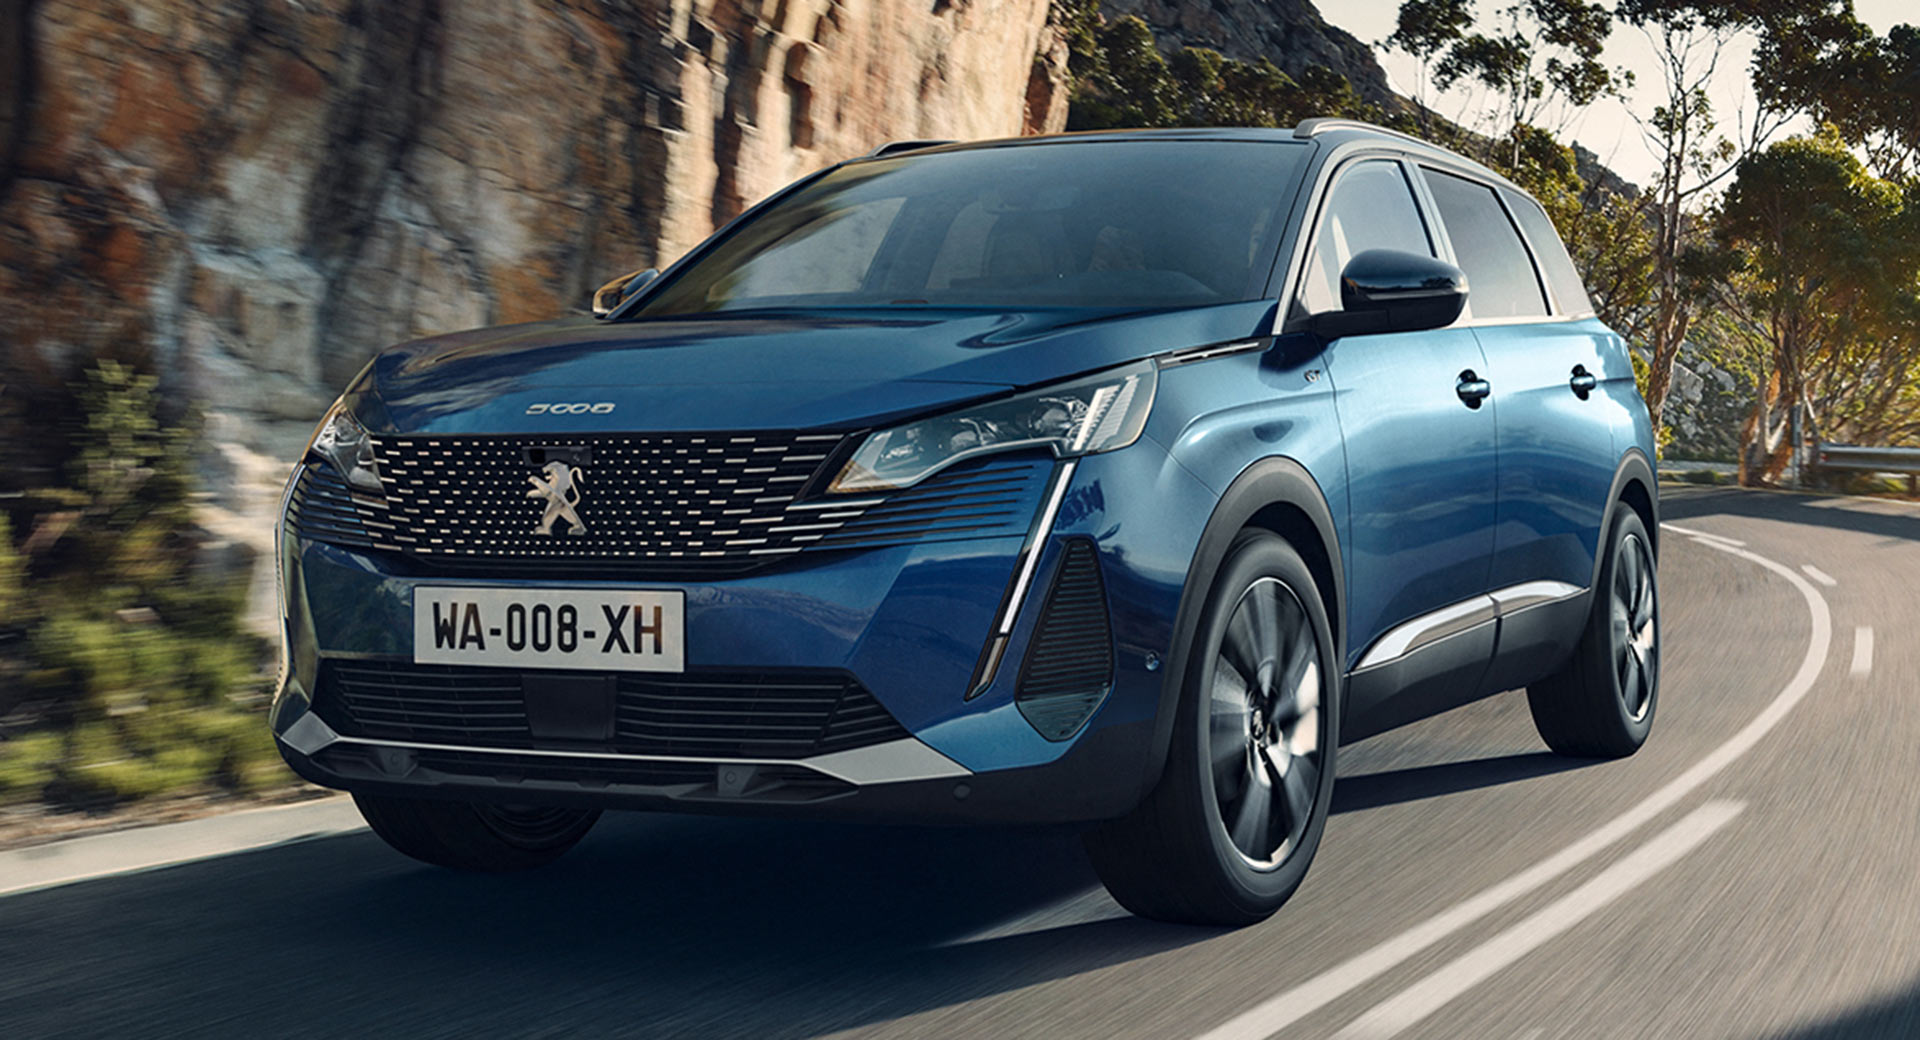 21 Peugeot 5008 Has A Fresh Look And A New Interior Carscoops